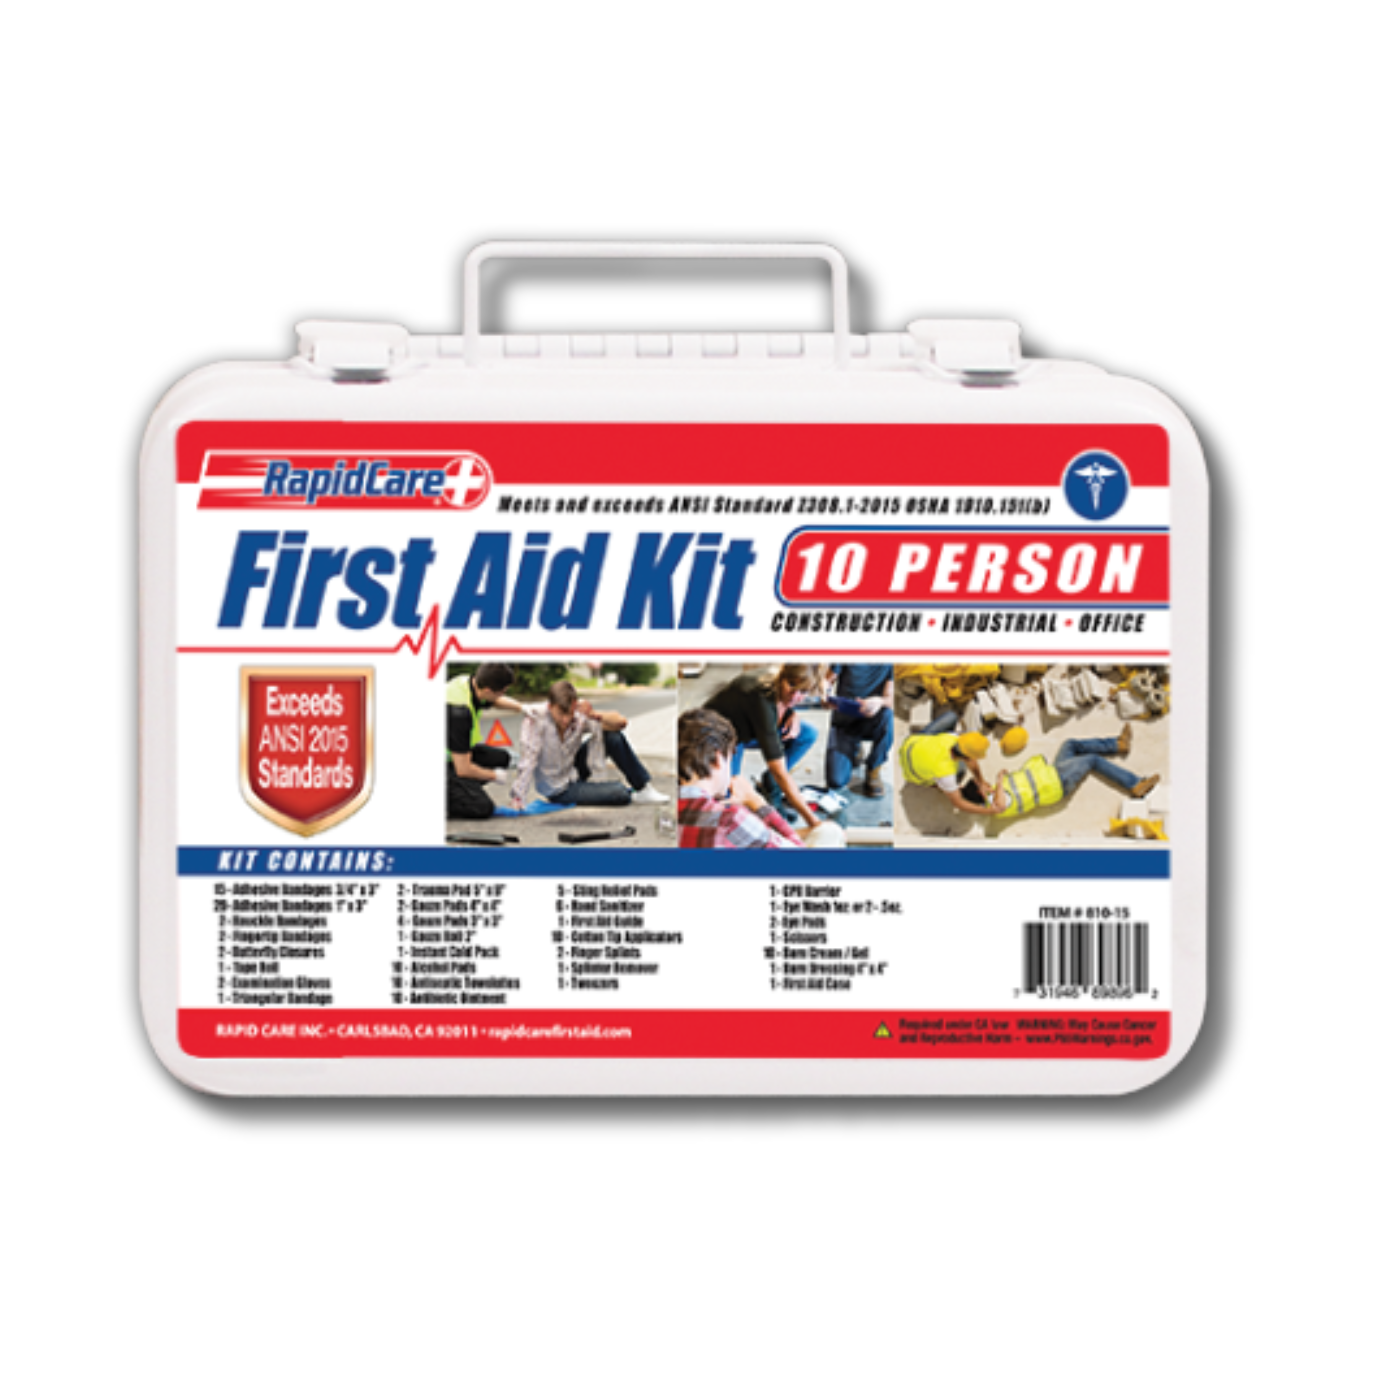 10 Person First Aid Kit - 2015.